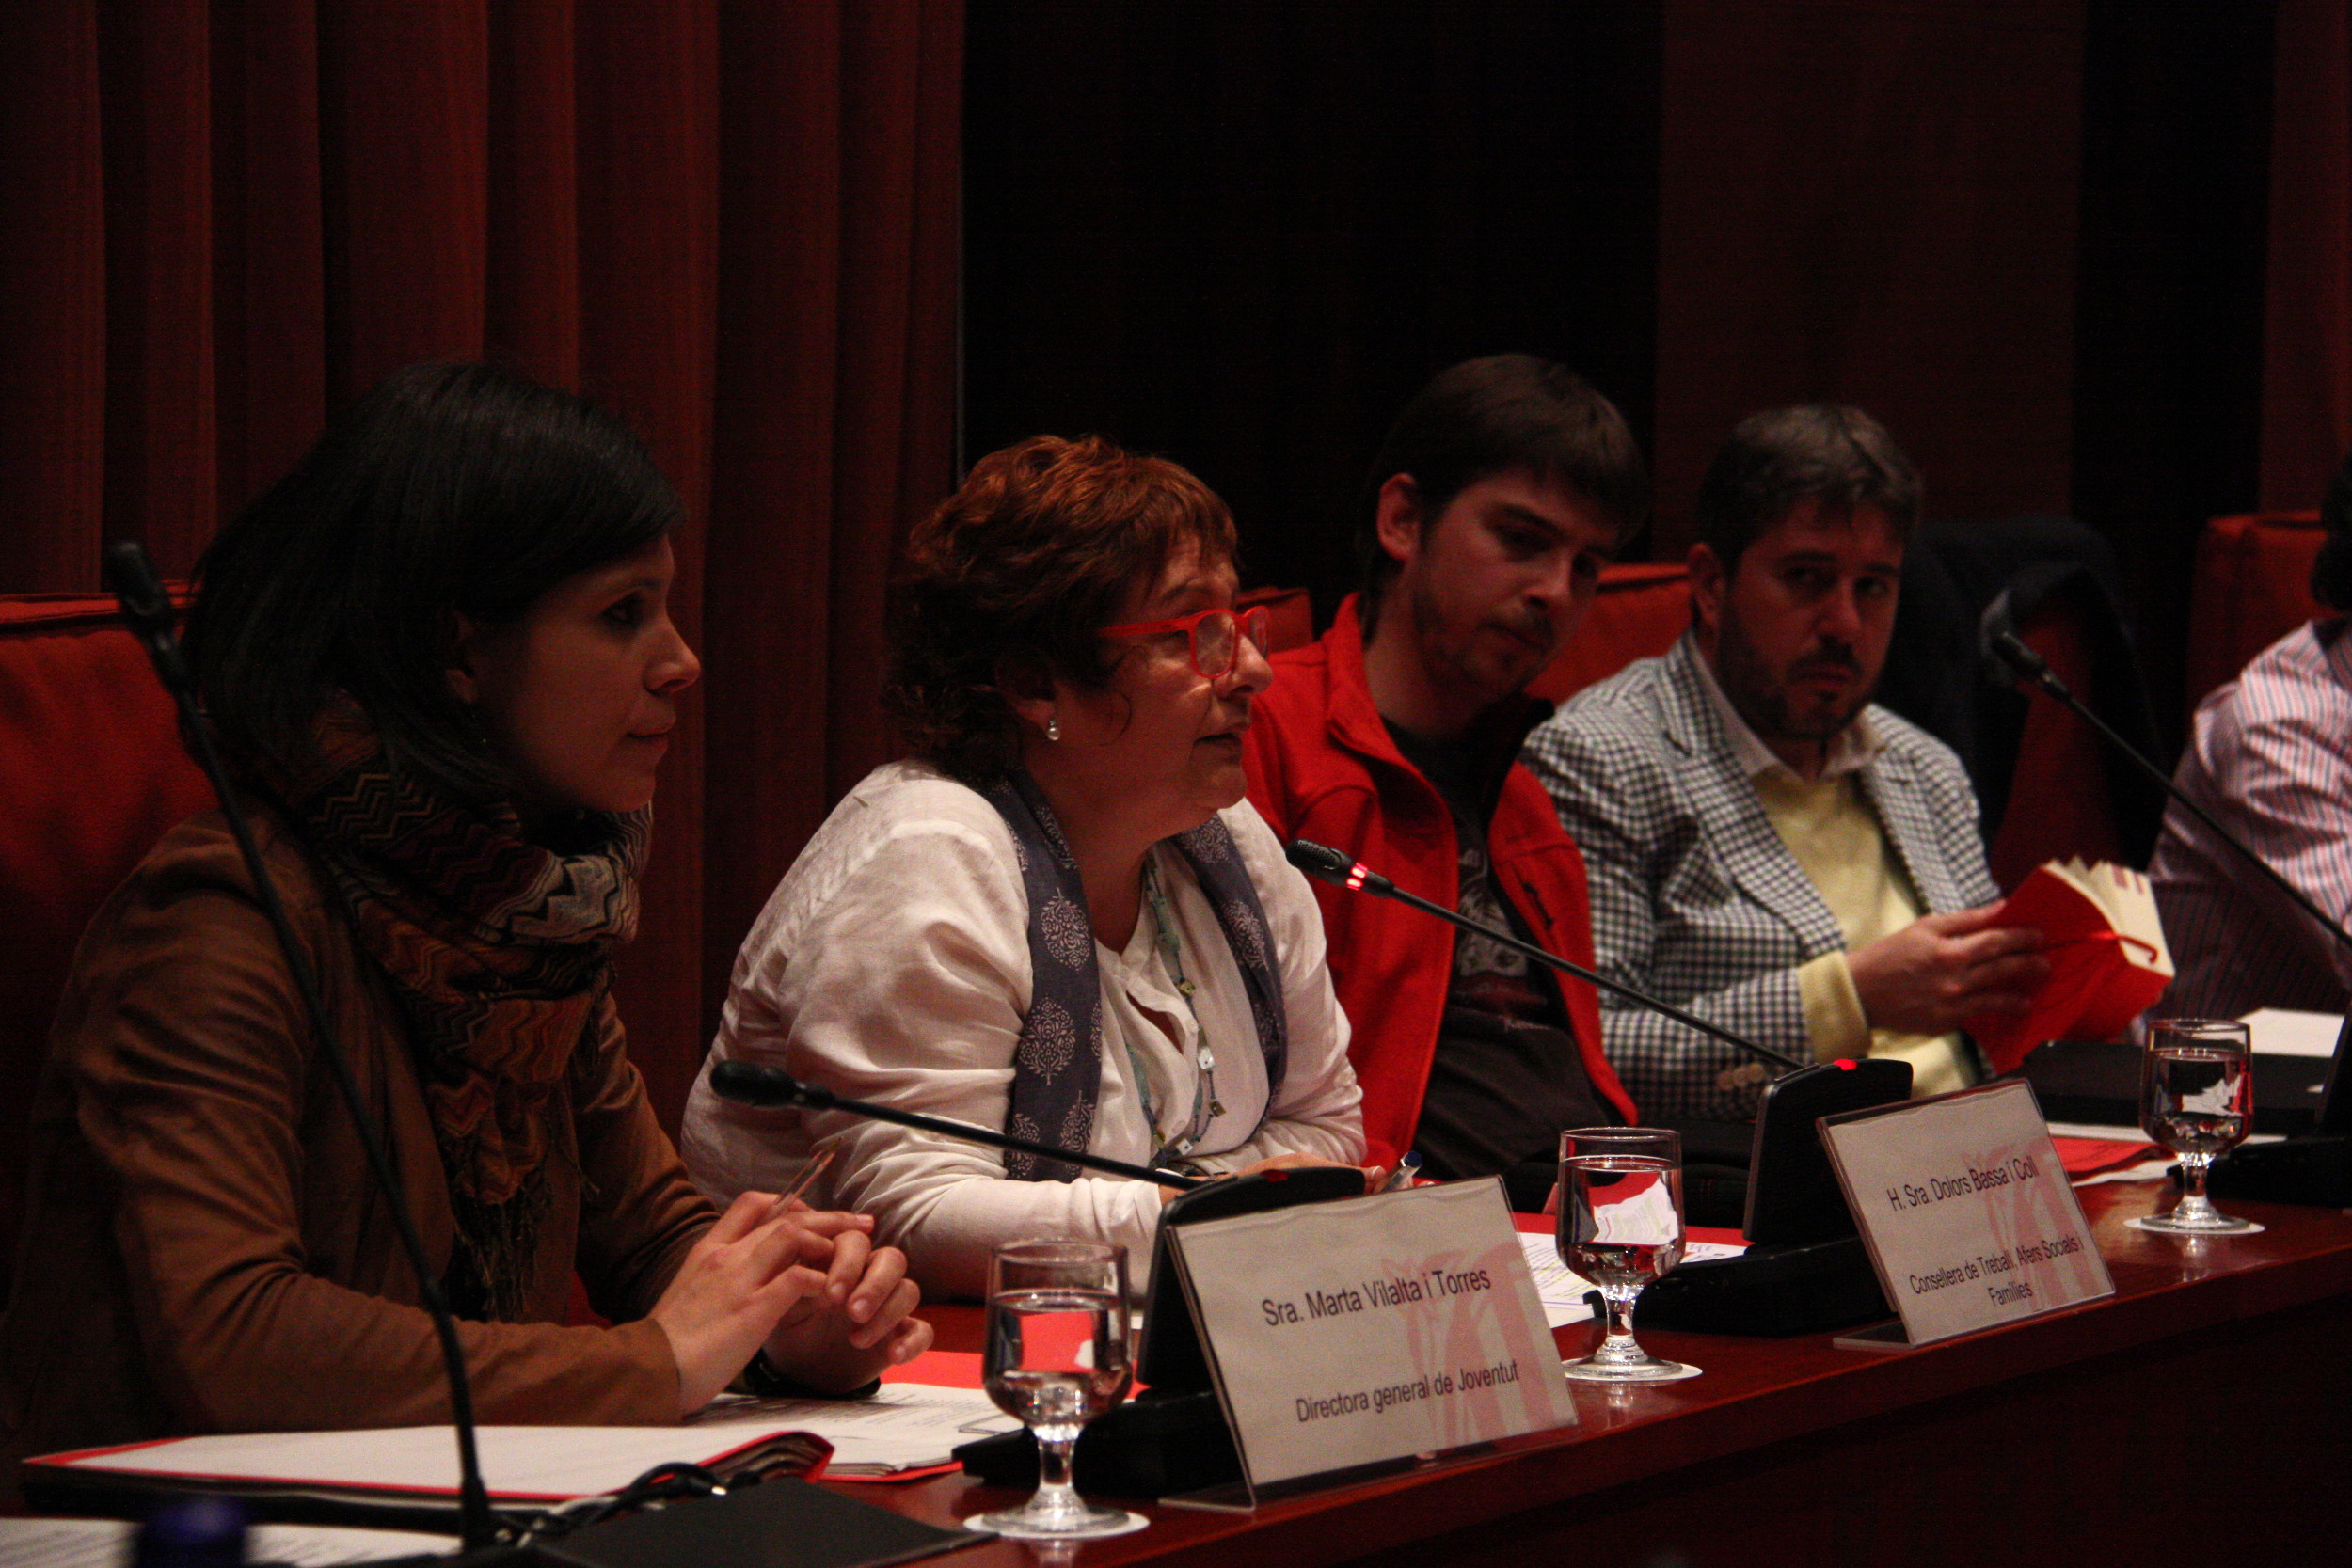 Deparmtent of Youth's director, Marta Vilalta and the Catalan Minister for Labour, Social Affairs and Families, Dolors Bassa (by ACN)